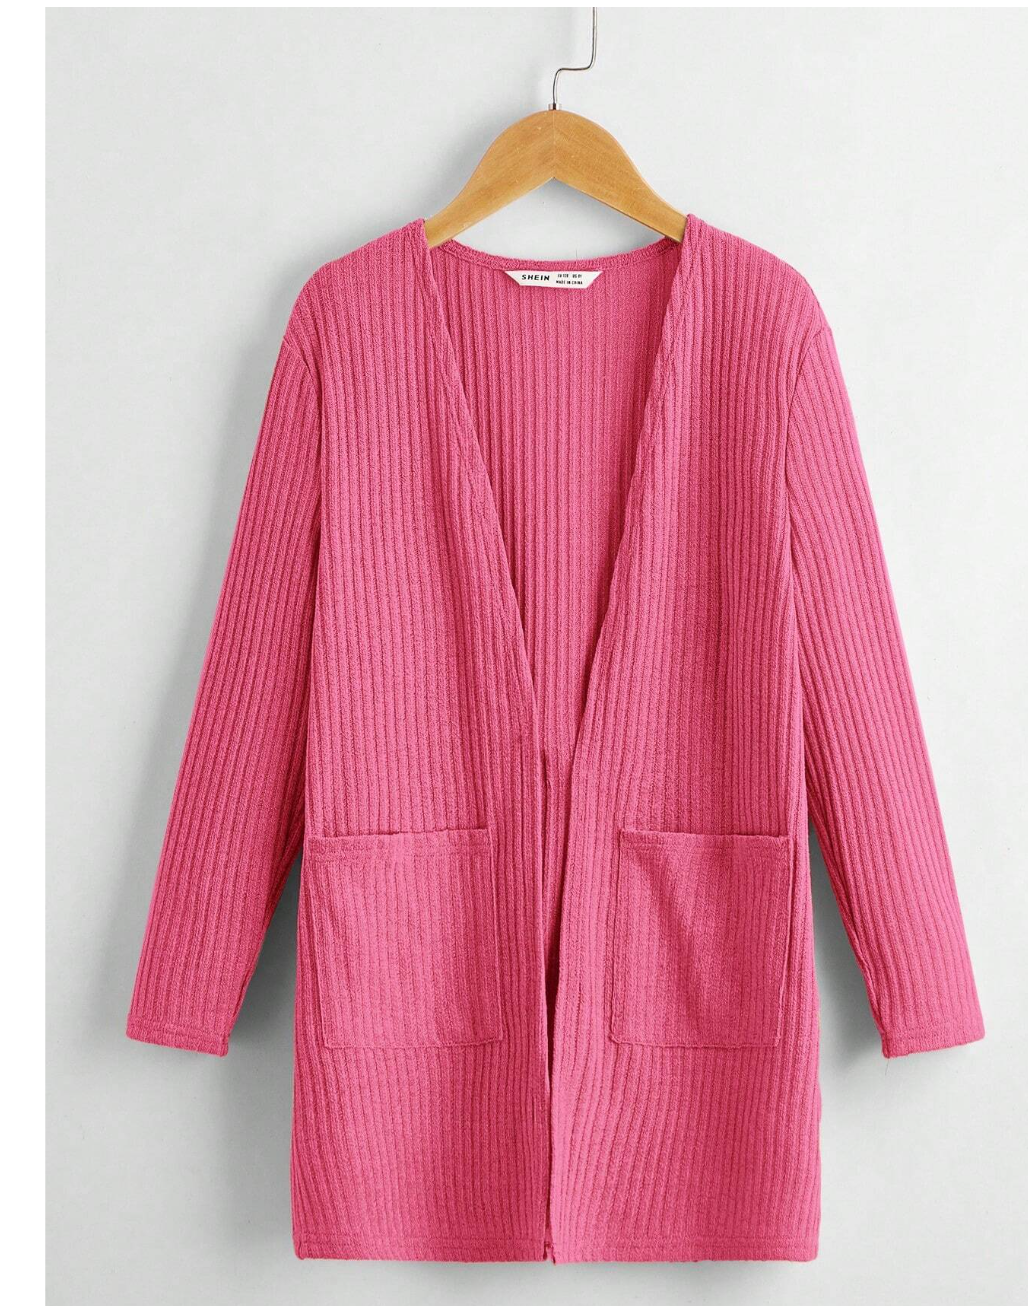 Tween Trendsetter: Kids EVRYDAY Open Front Rib-Knit Coat with Patch Pockets for Everyday Chic!